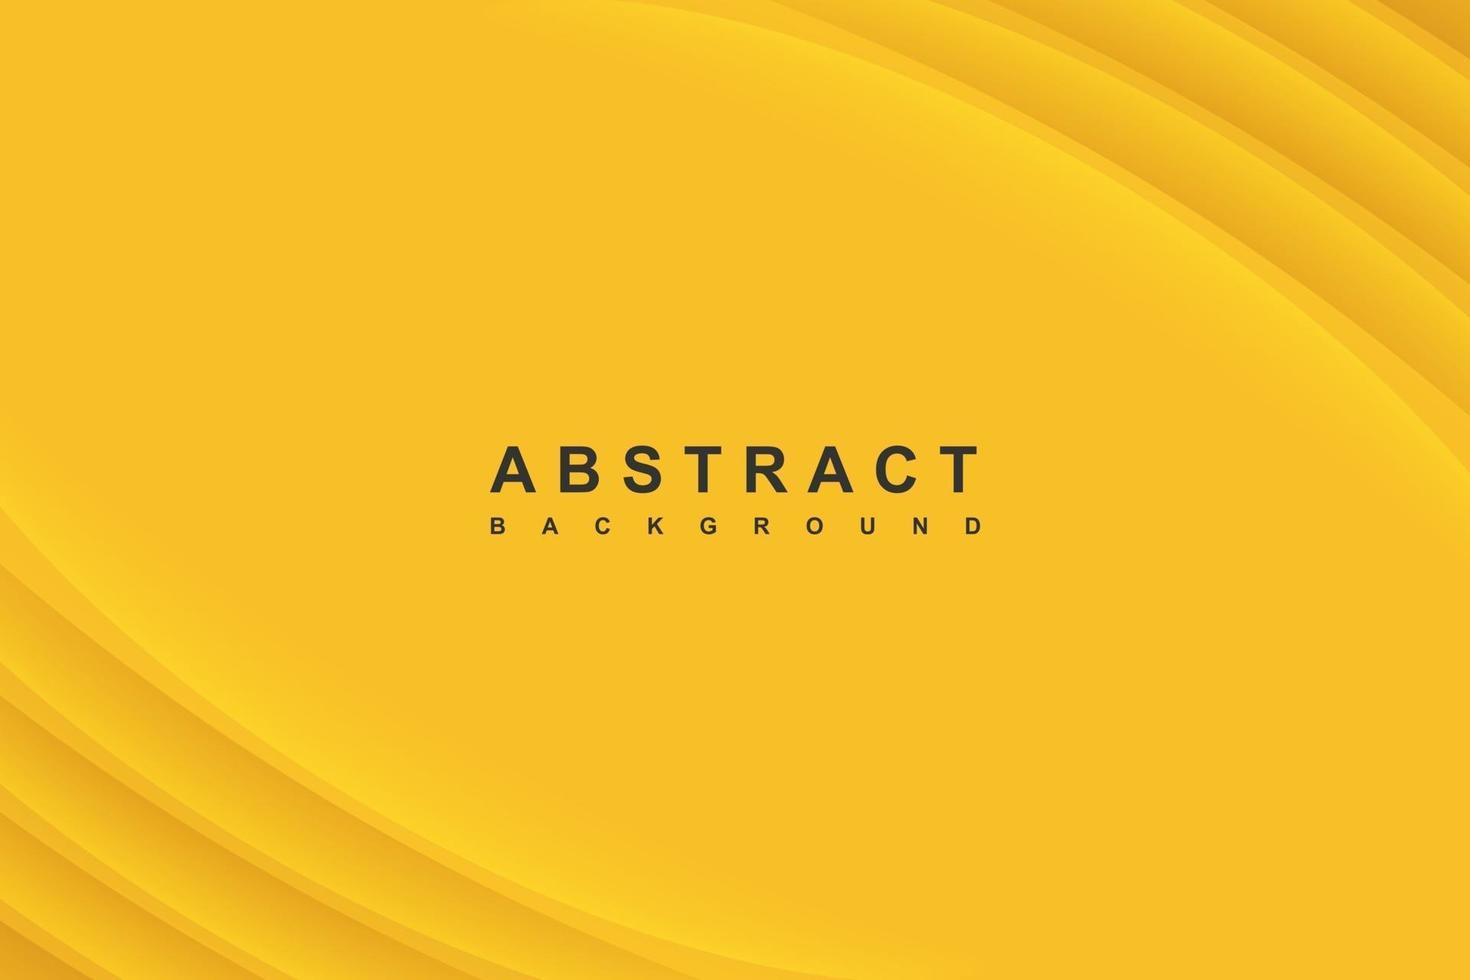 Abstract modern background yellow with shadow decoration vector